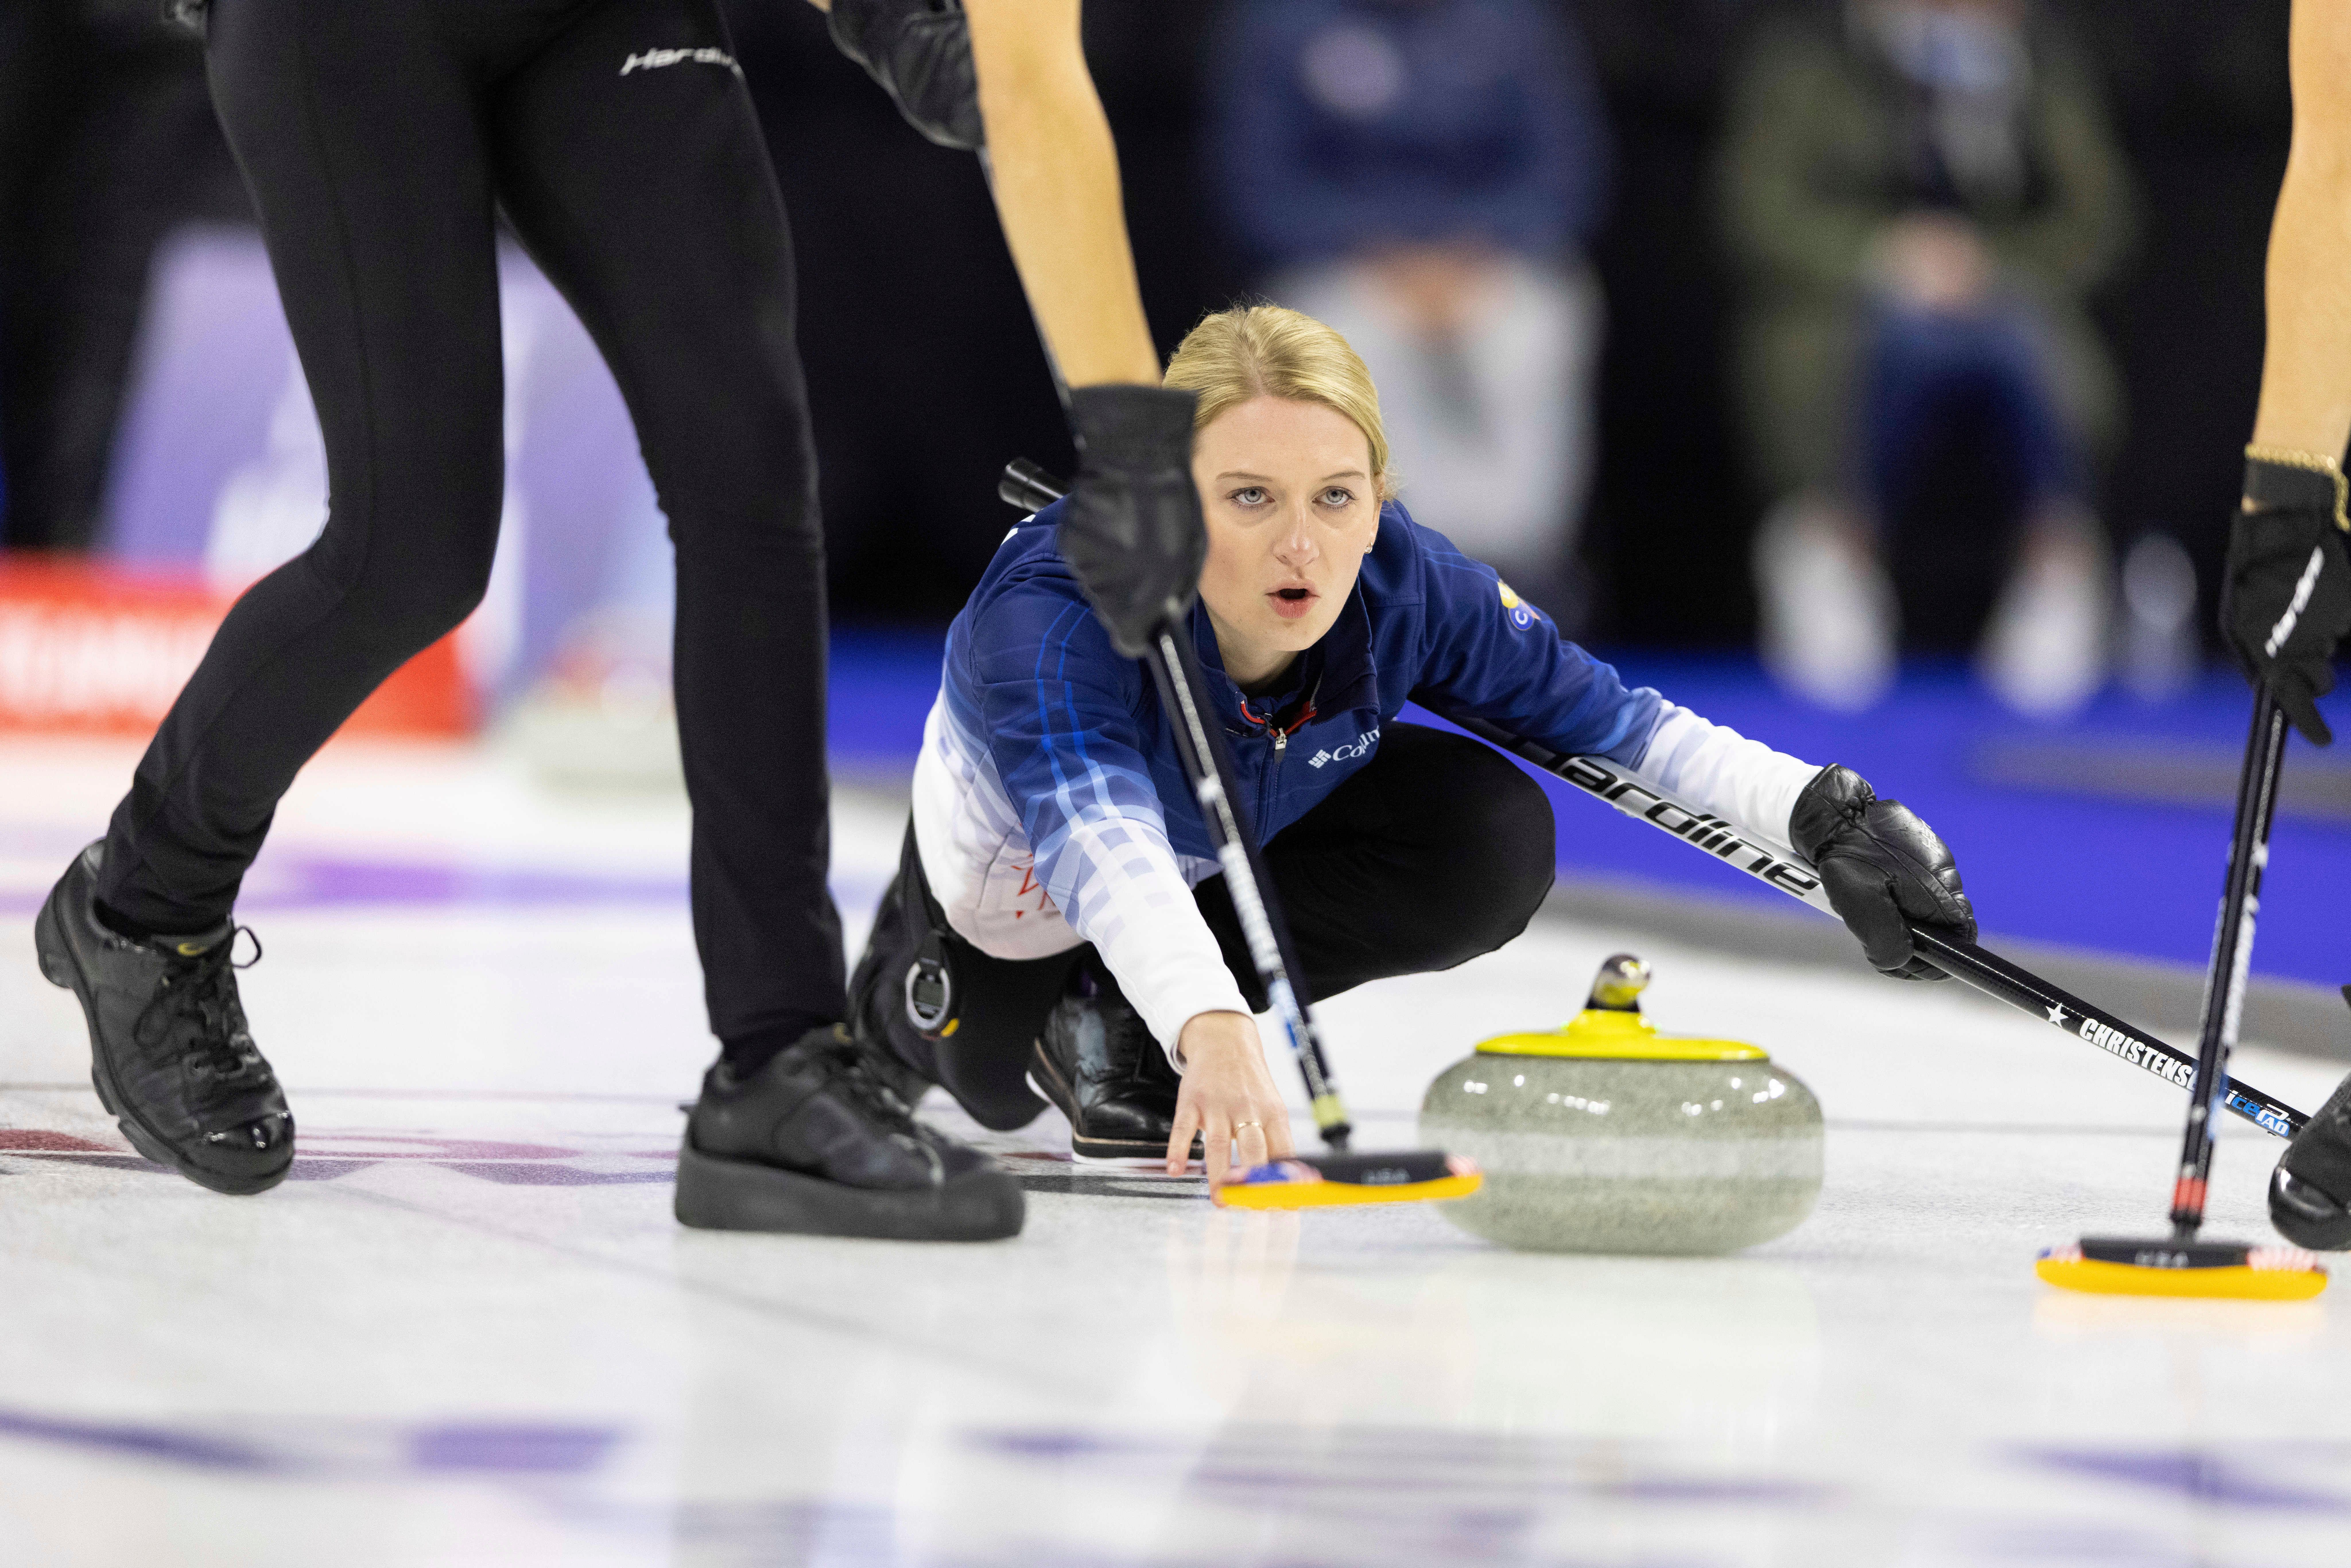 Sex toy ads removed from ice at Olympic curling qualifier The Seattle Times